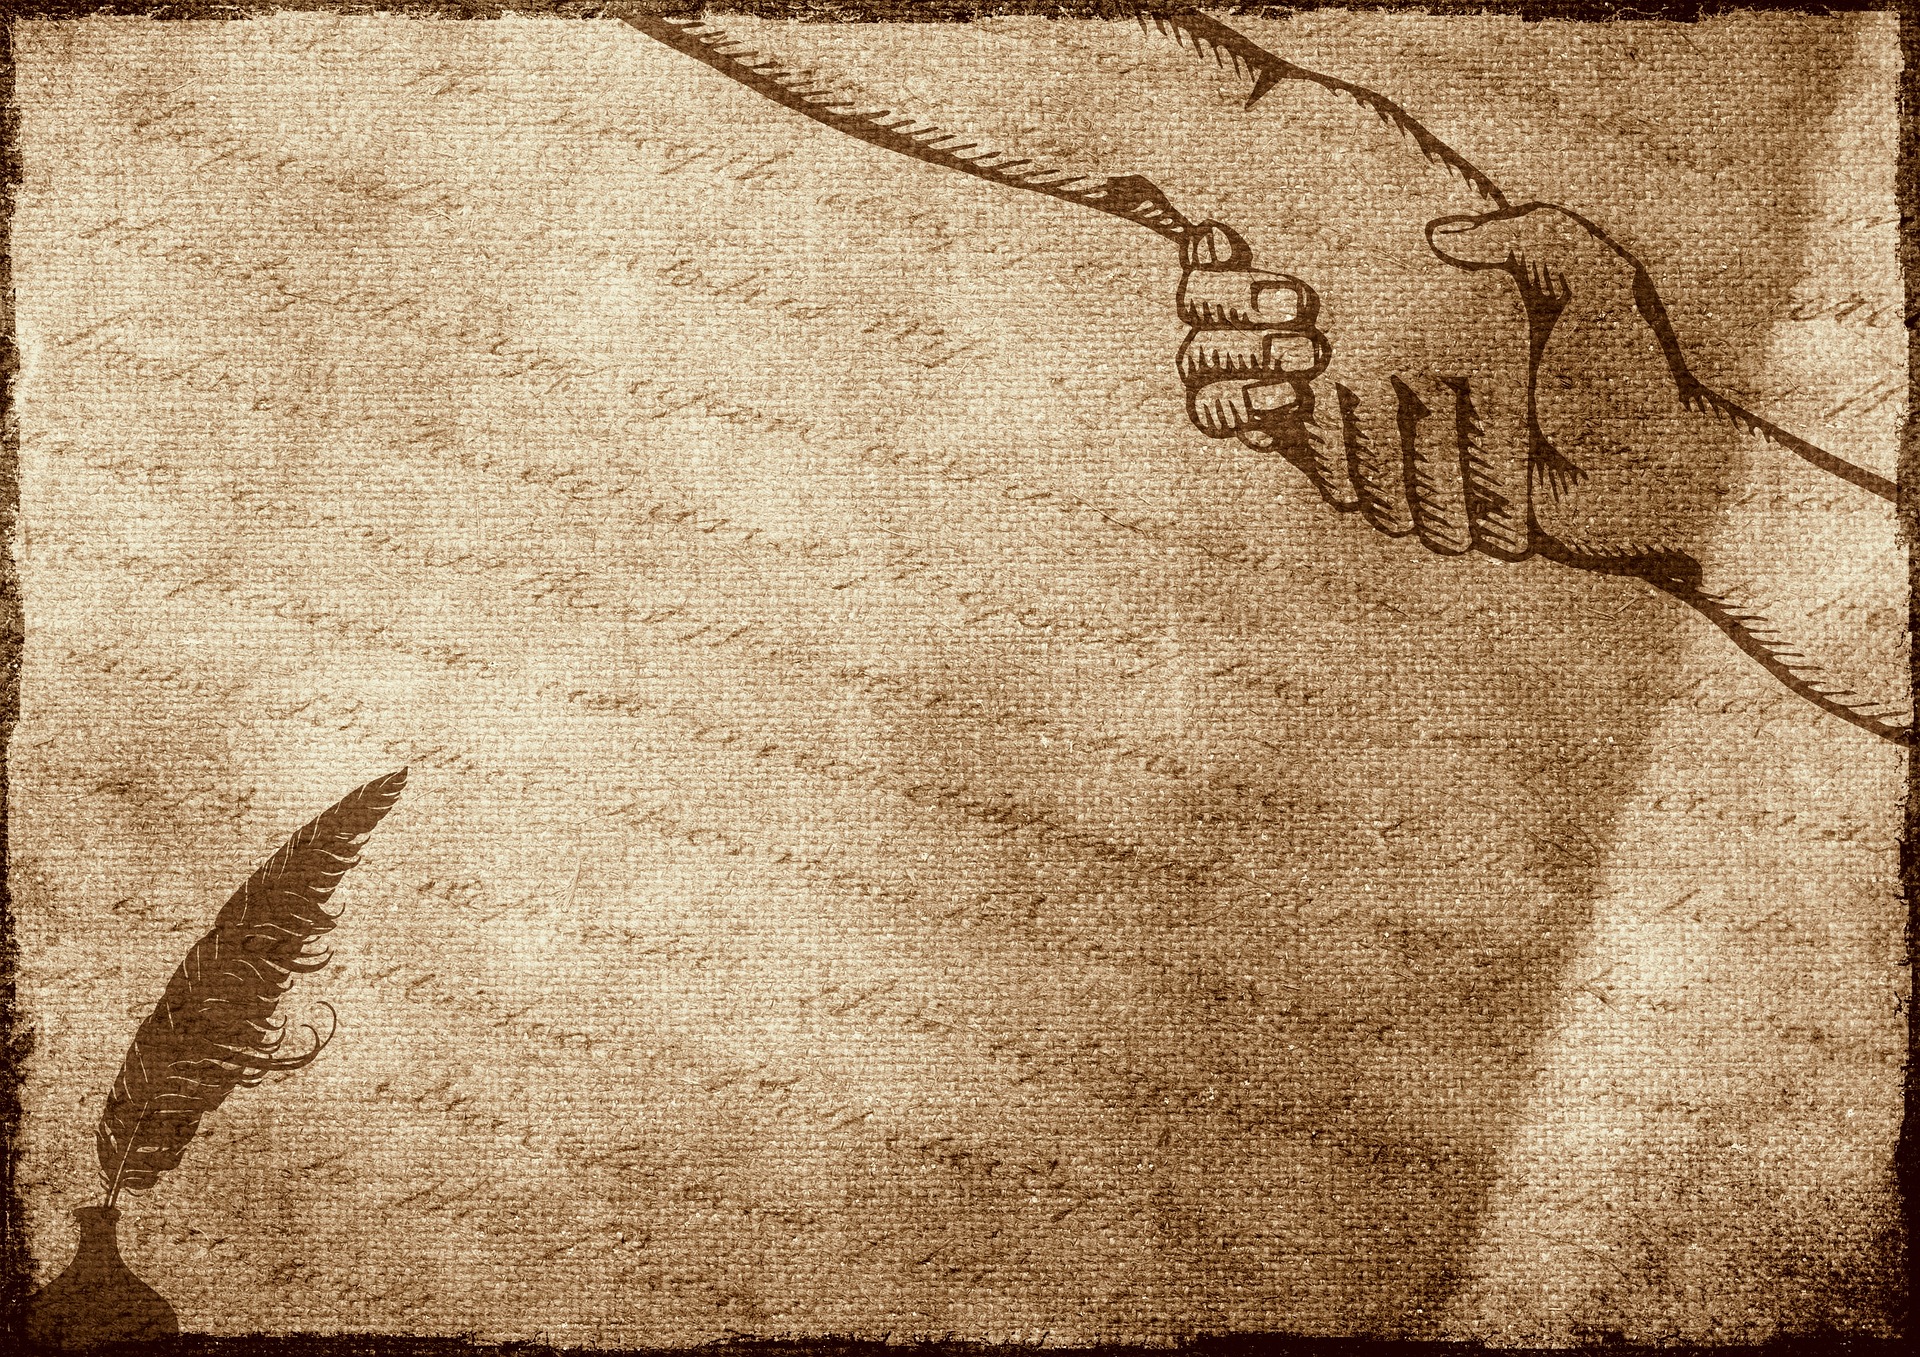 image of parchment contract